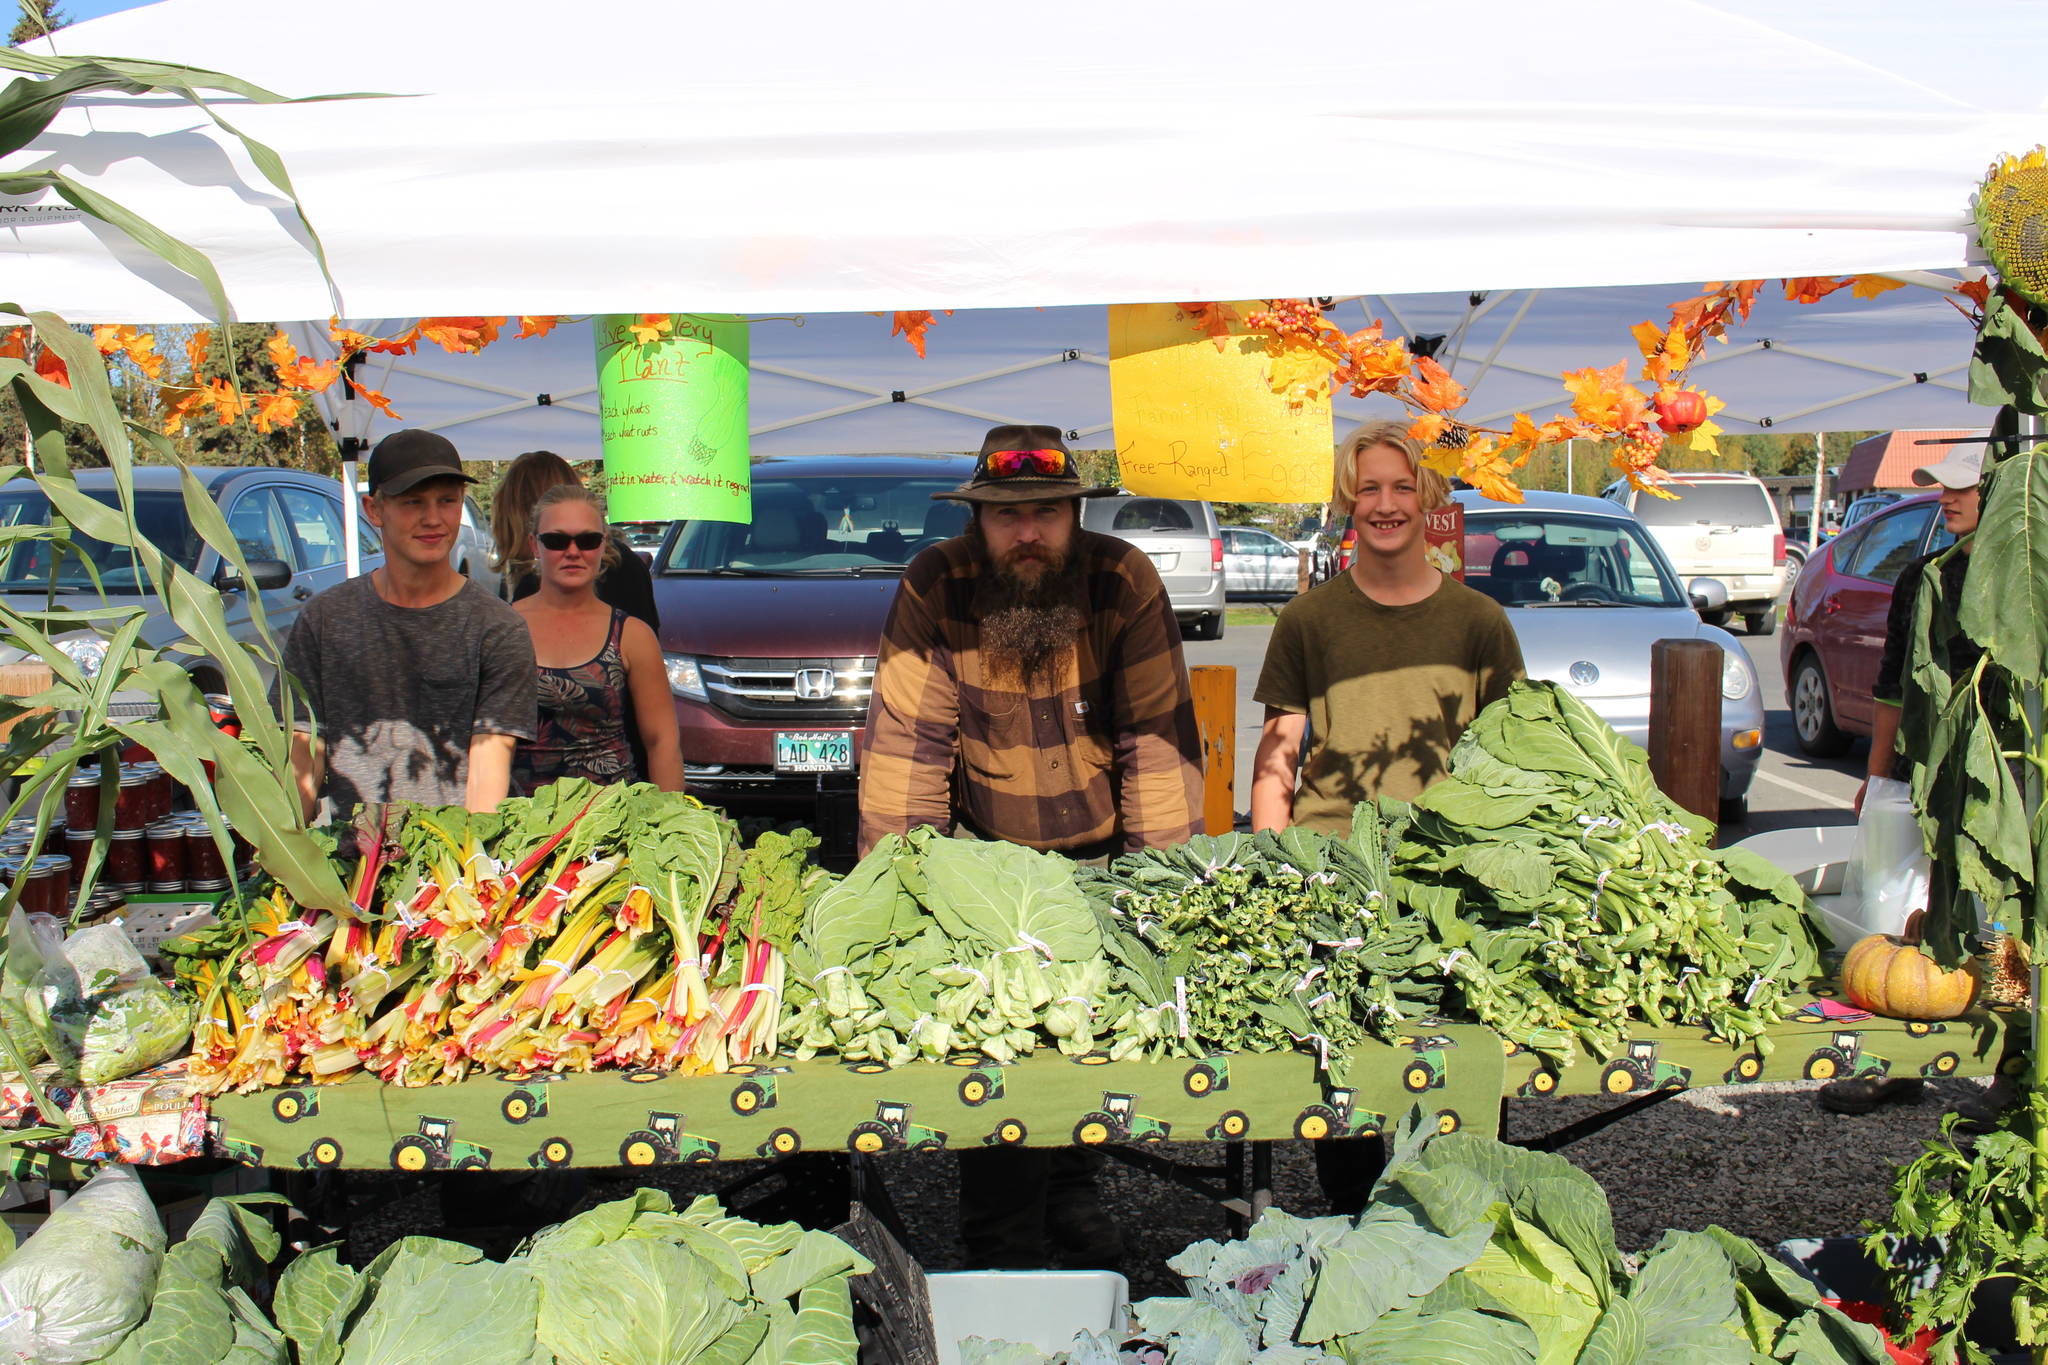 John Land, Christina Land, Joshua Land and Edgar Land of Grace Acres Farm show off some of their produce at the Harvest Moon Local Food Festival at Soldotna Creek Park on Sept. 14, 2019. (Photo by Brian Mazurek/Peninsula Clarion)